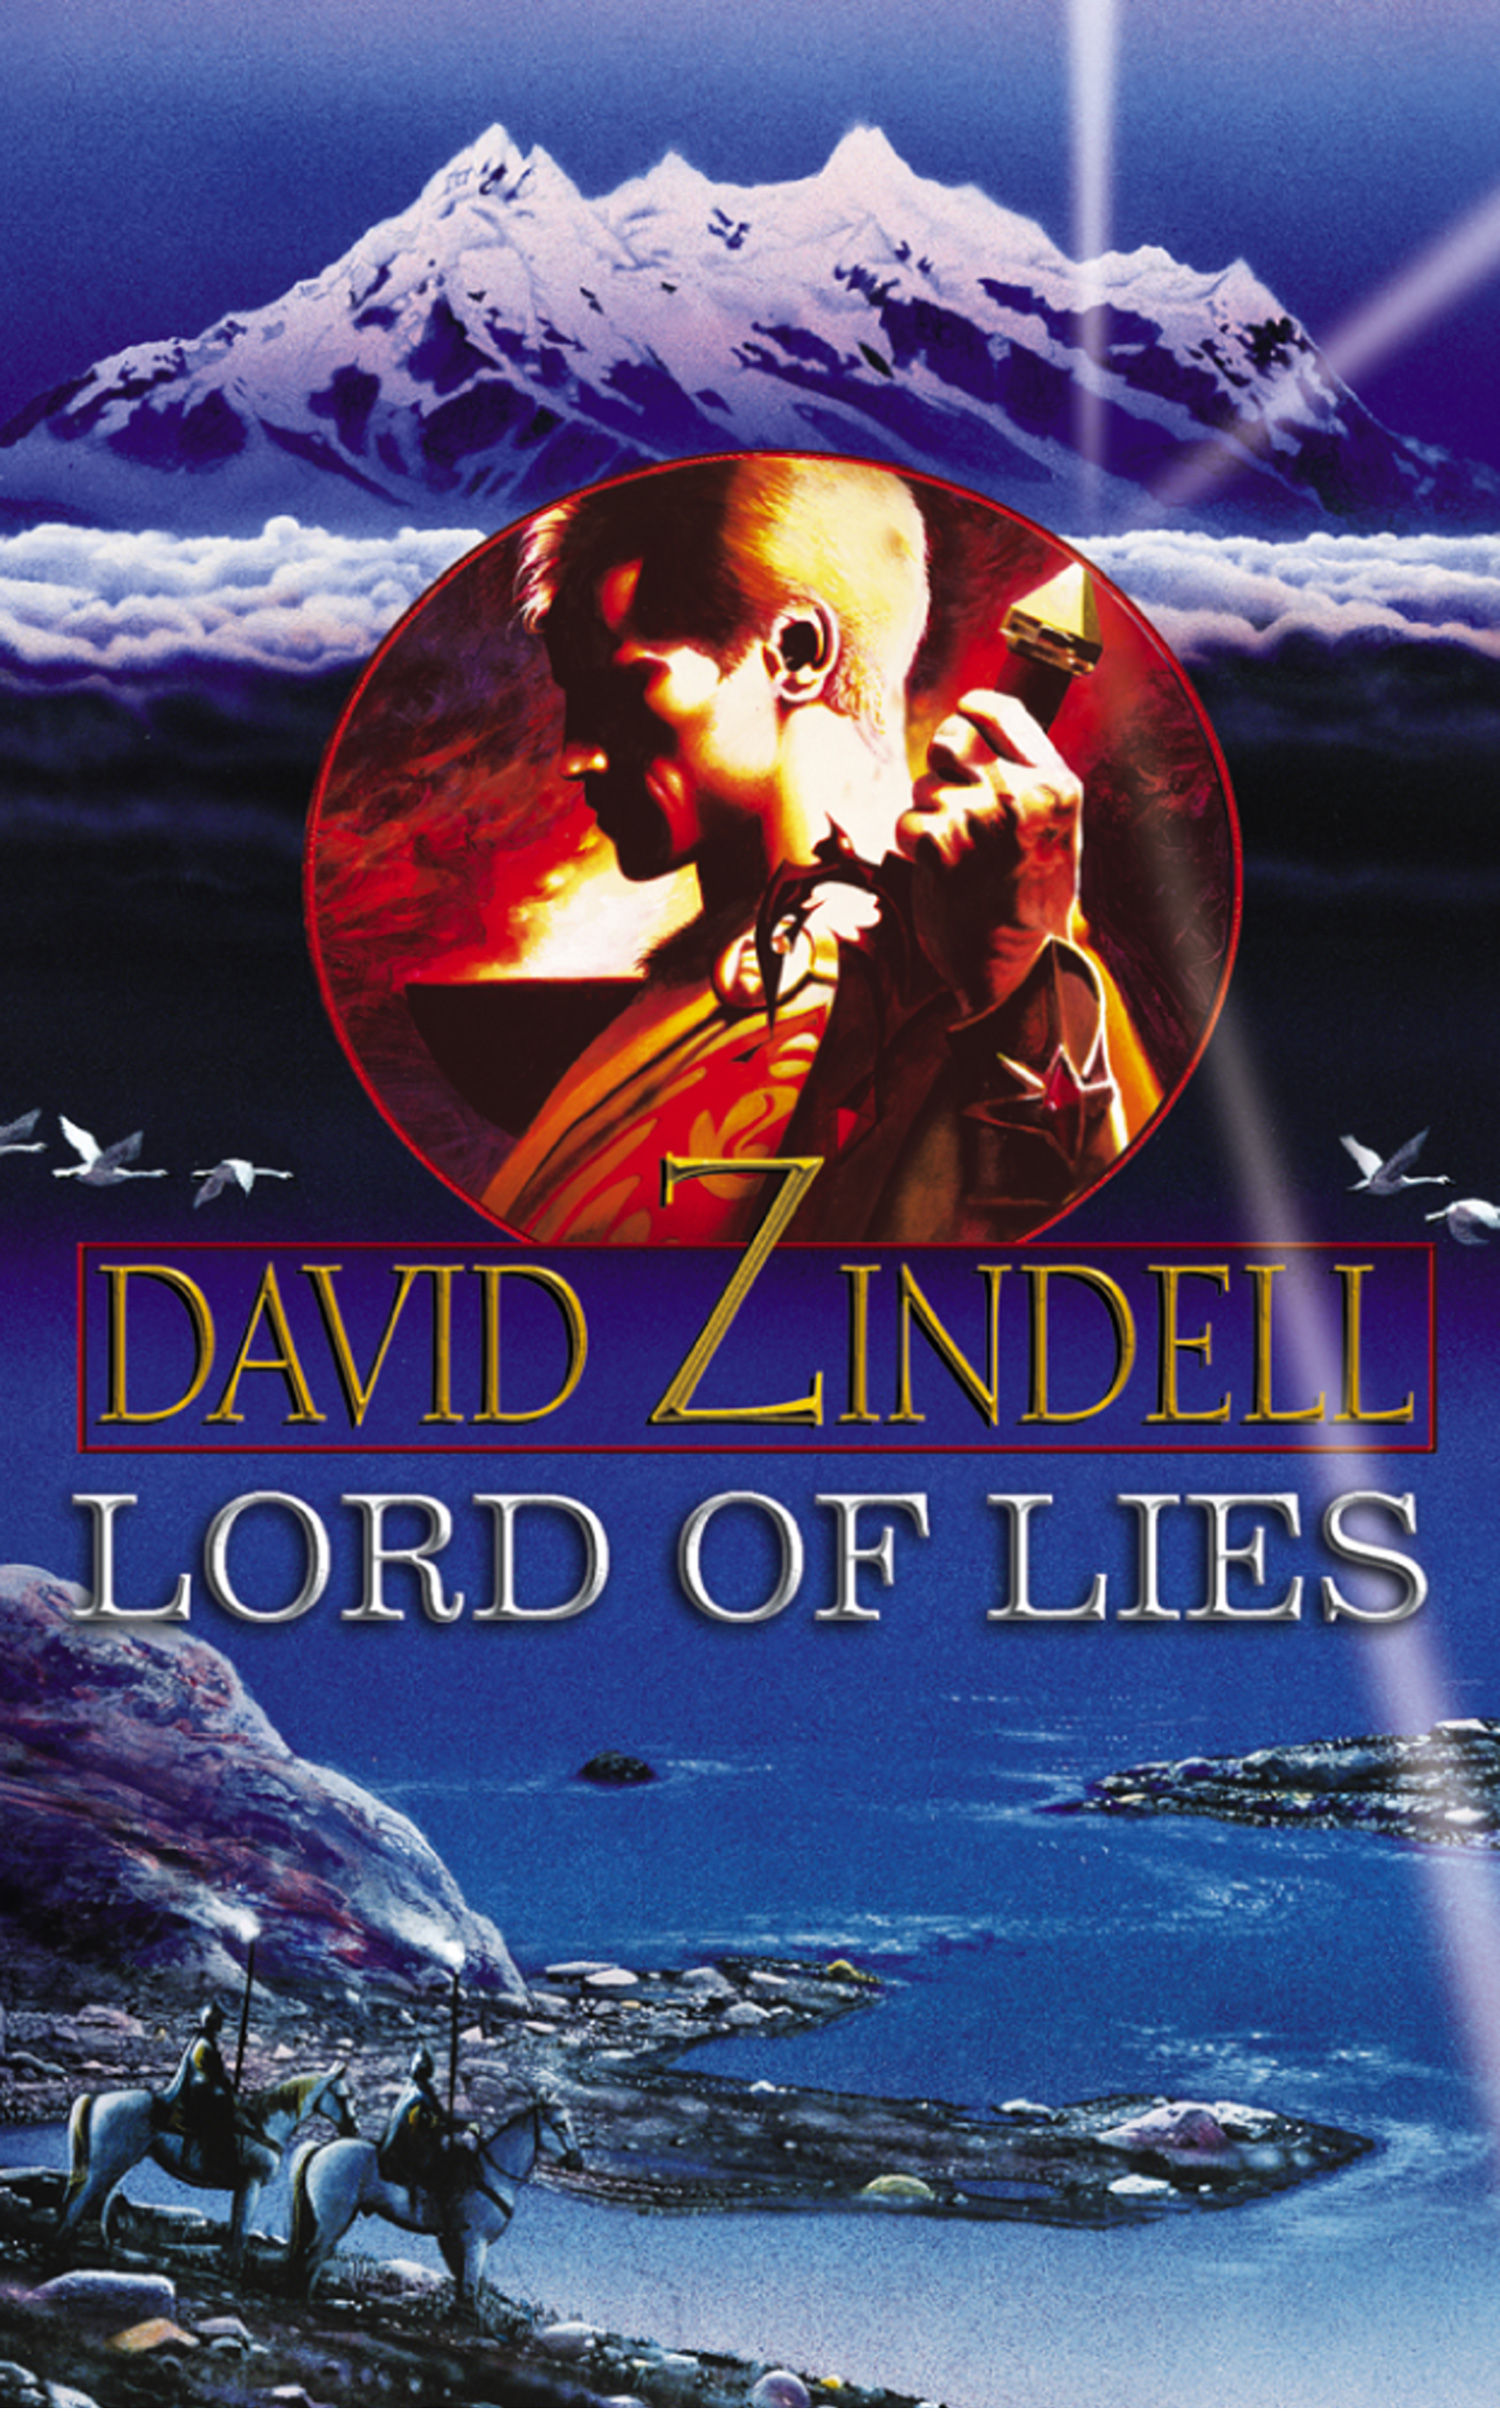 Lord of Lies